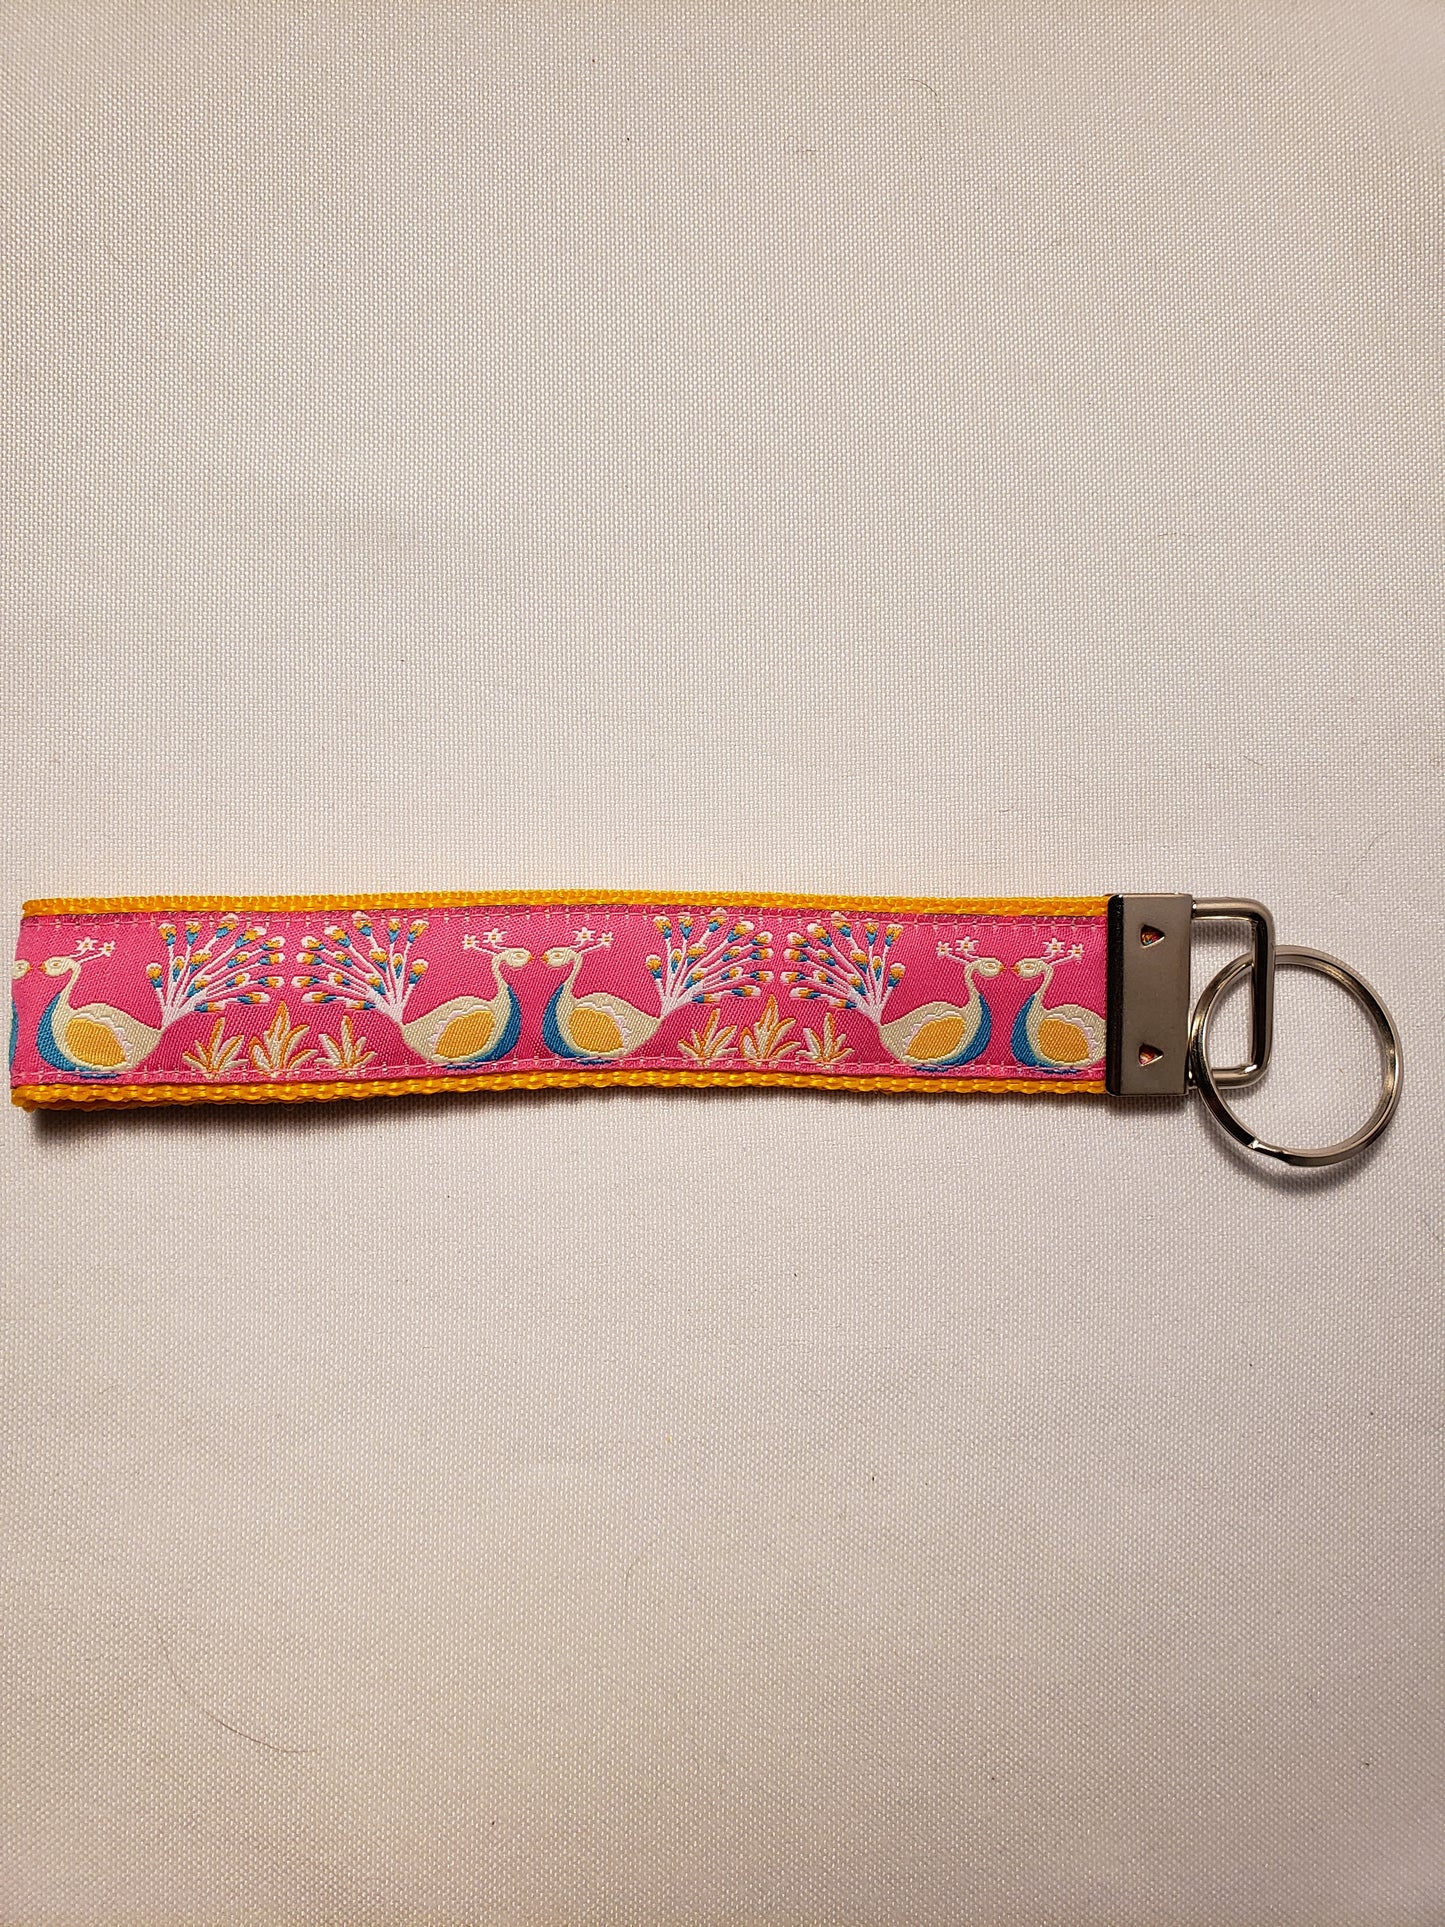 Peacocks on Pink Feathers Key Fob